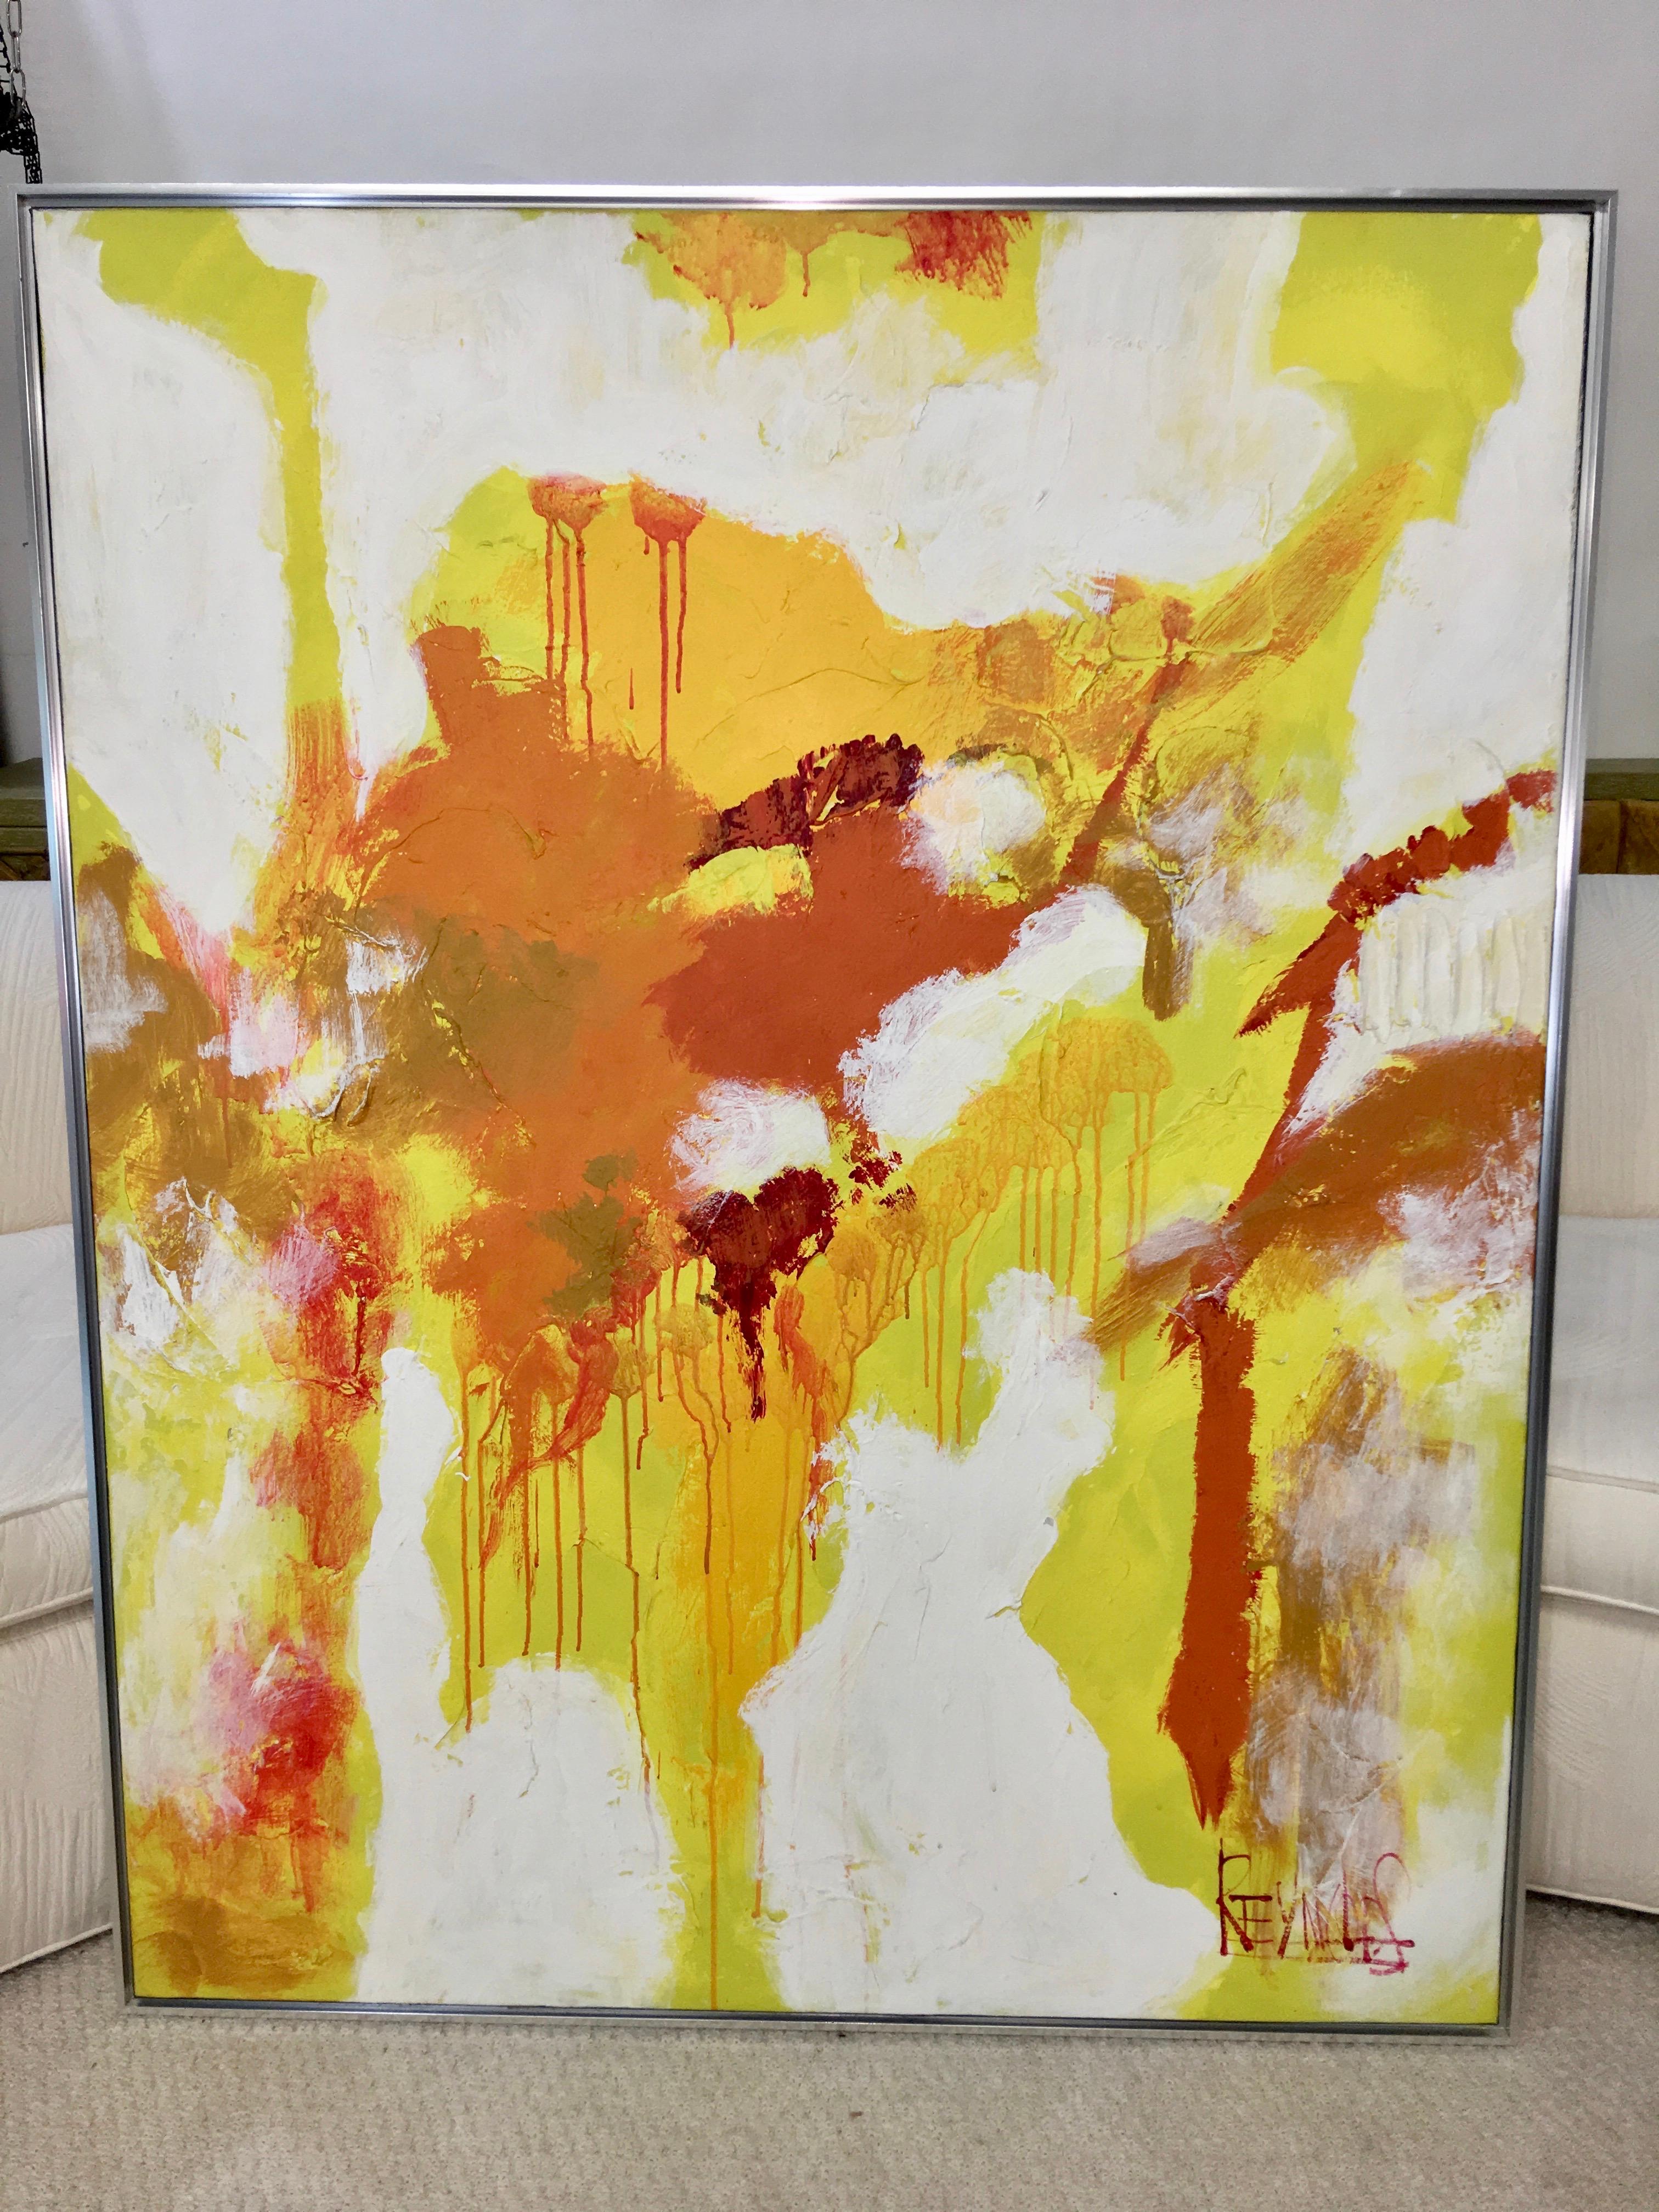 1960s oil on canvas abstract painting signed 'Reynolds'. This large scale artwork features a bright white ground with vivid yellow, orange, red and pink textured palette knife detail. See the obituary for Lee Reynolds Burr for the history of his